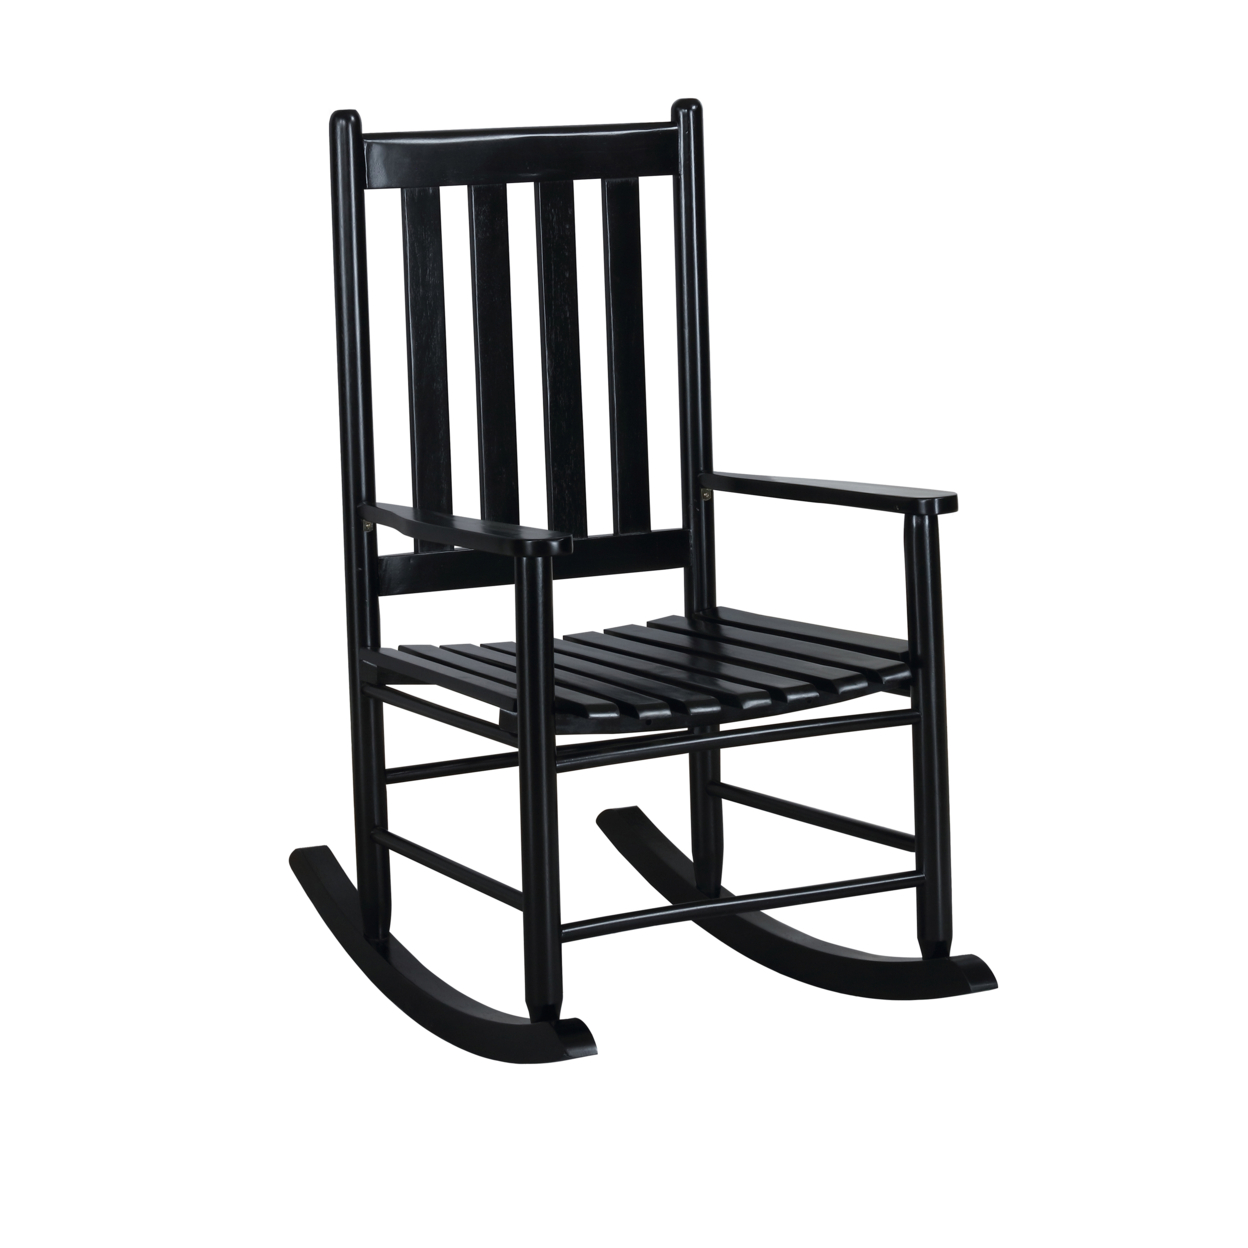 Wooden Rocking Chair With Slat Back And Mission Style, Black- Saltoro Sherpi